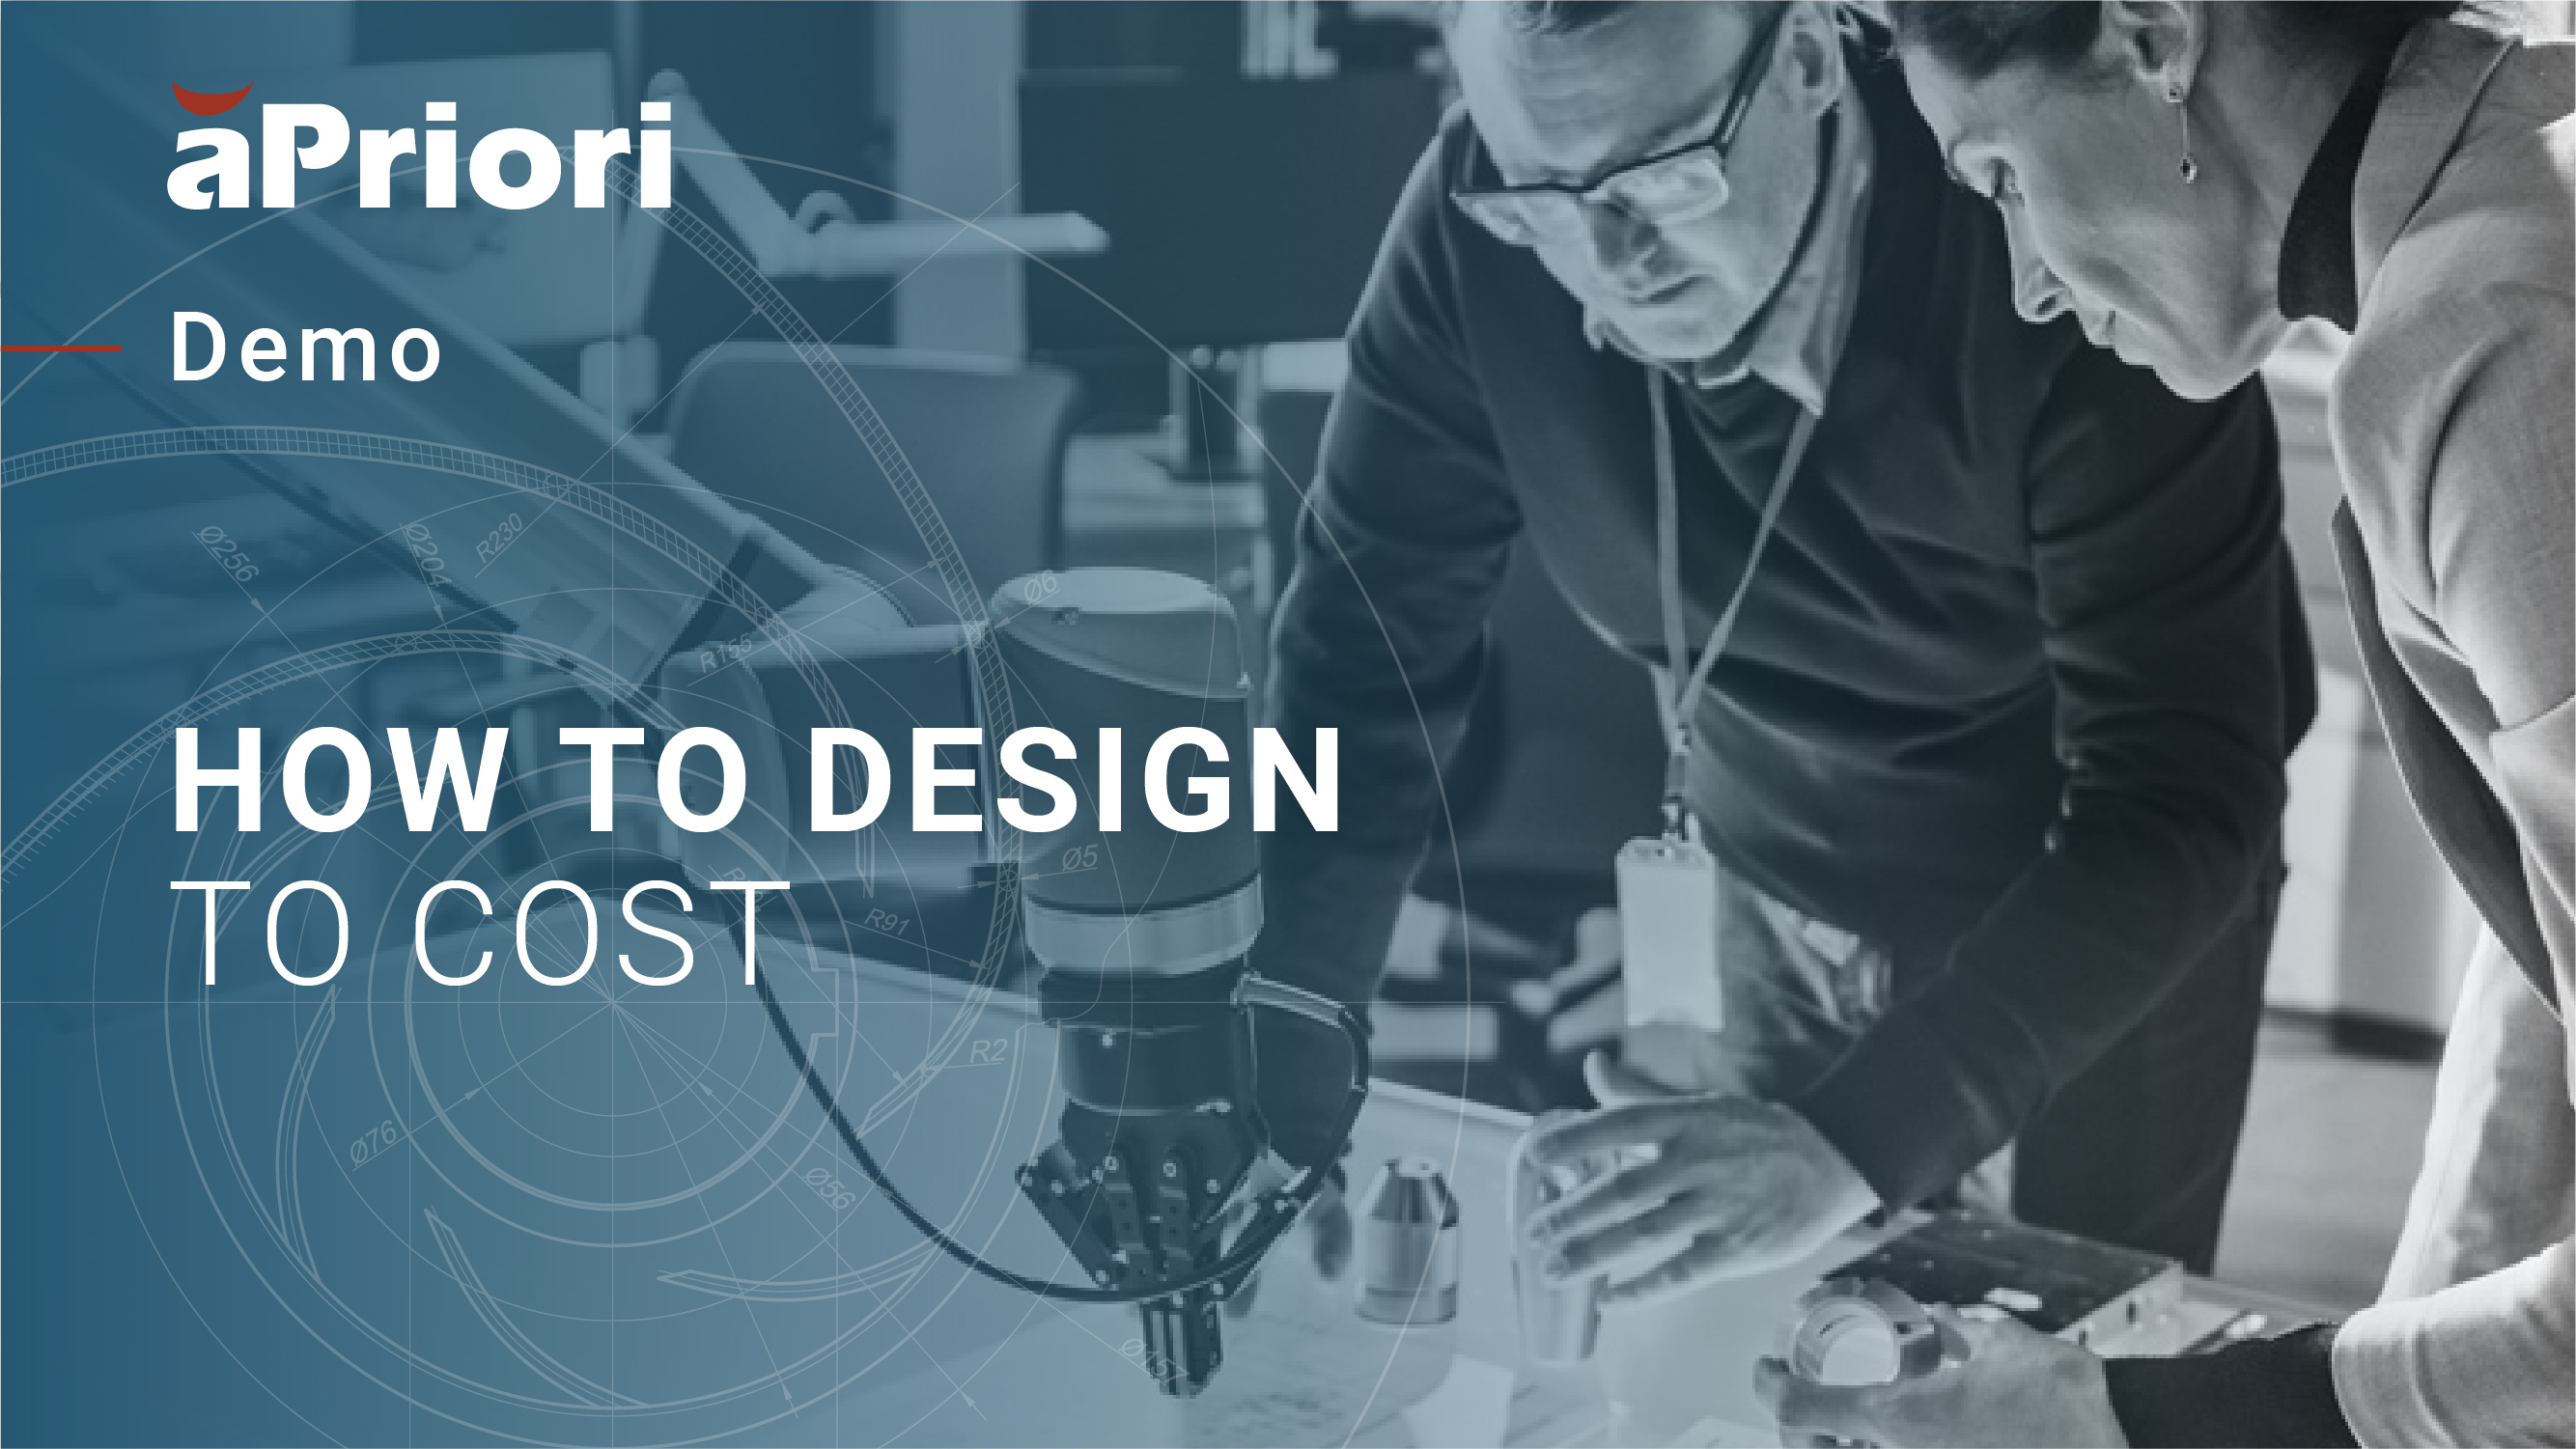 Demonstration of How aPriori Provides Early Design Feedback in Design To Cost